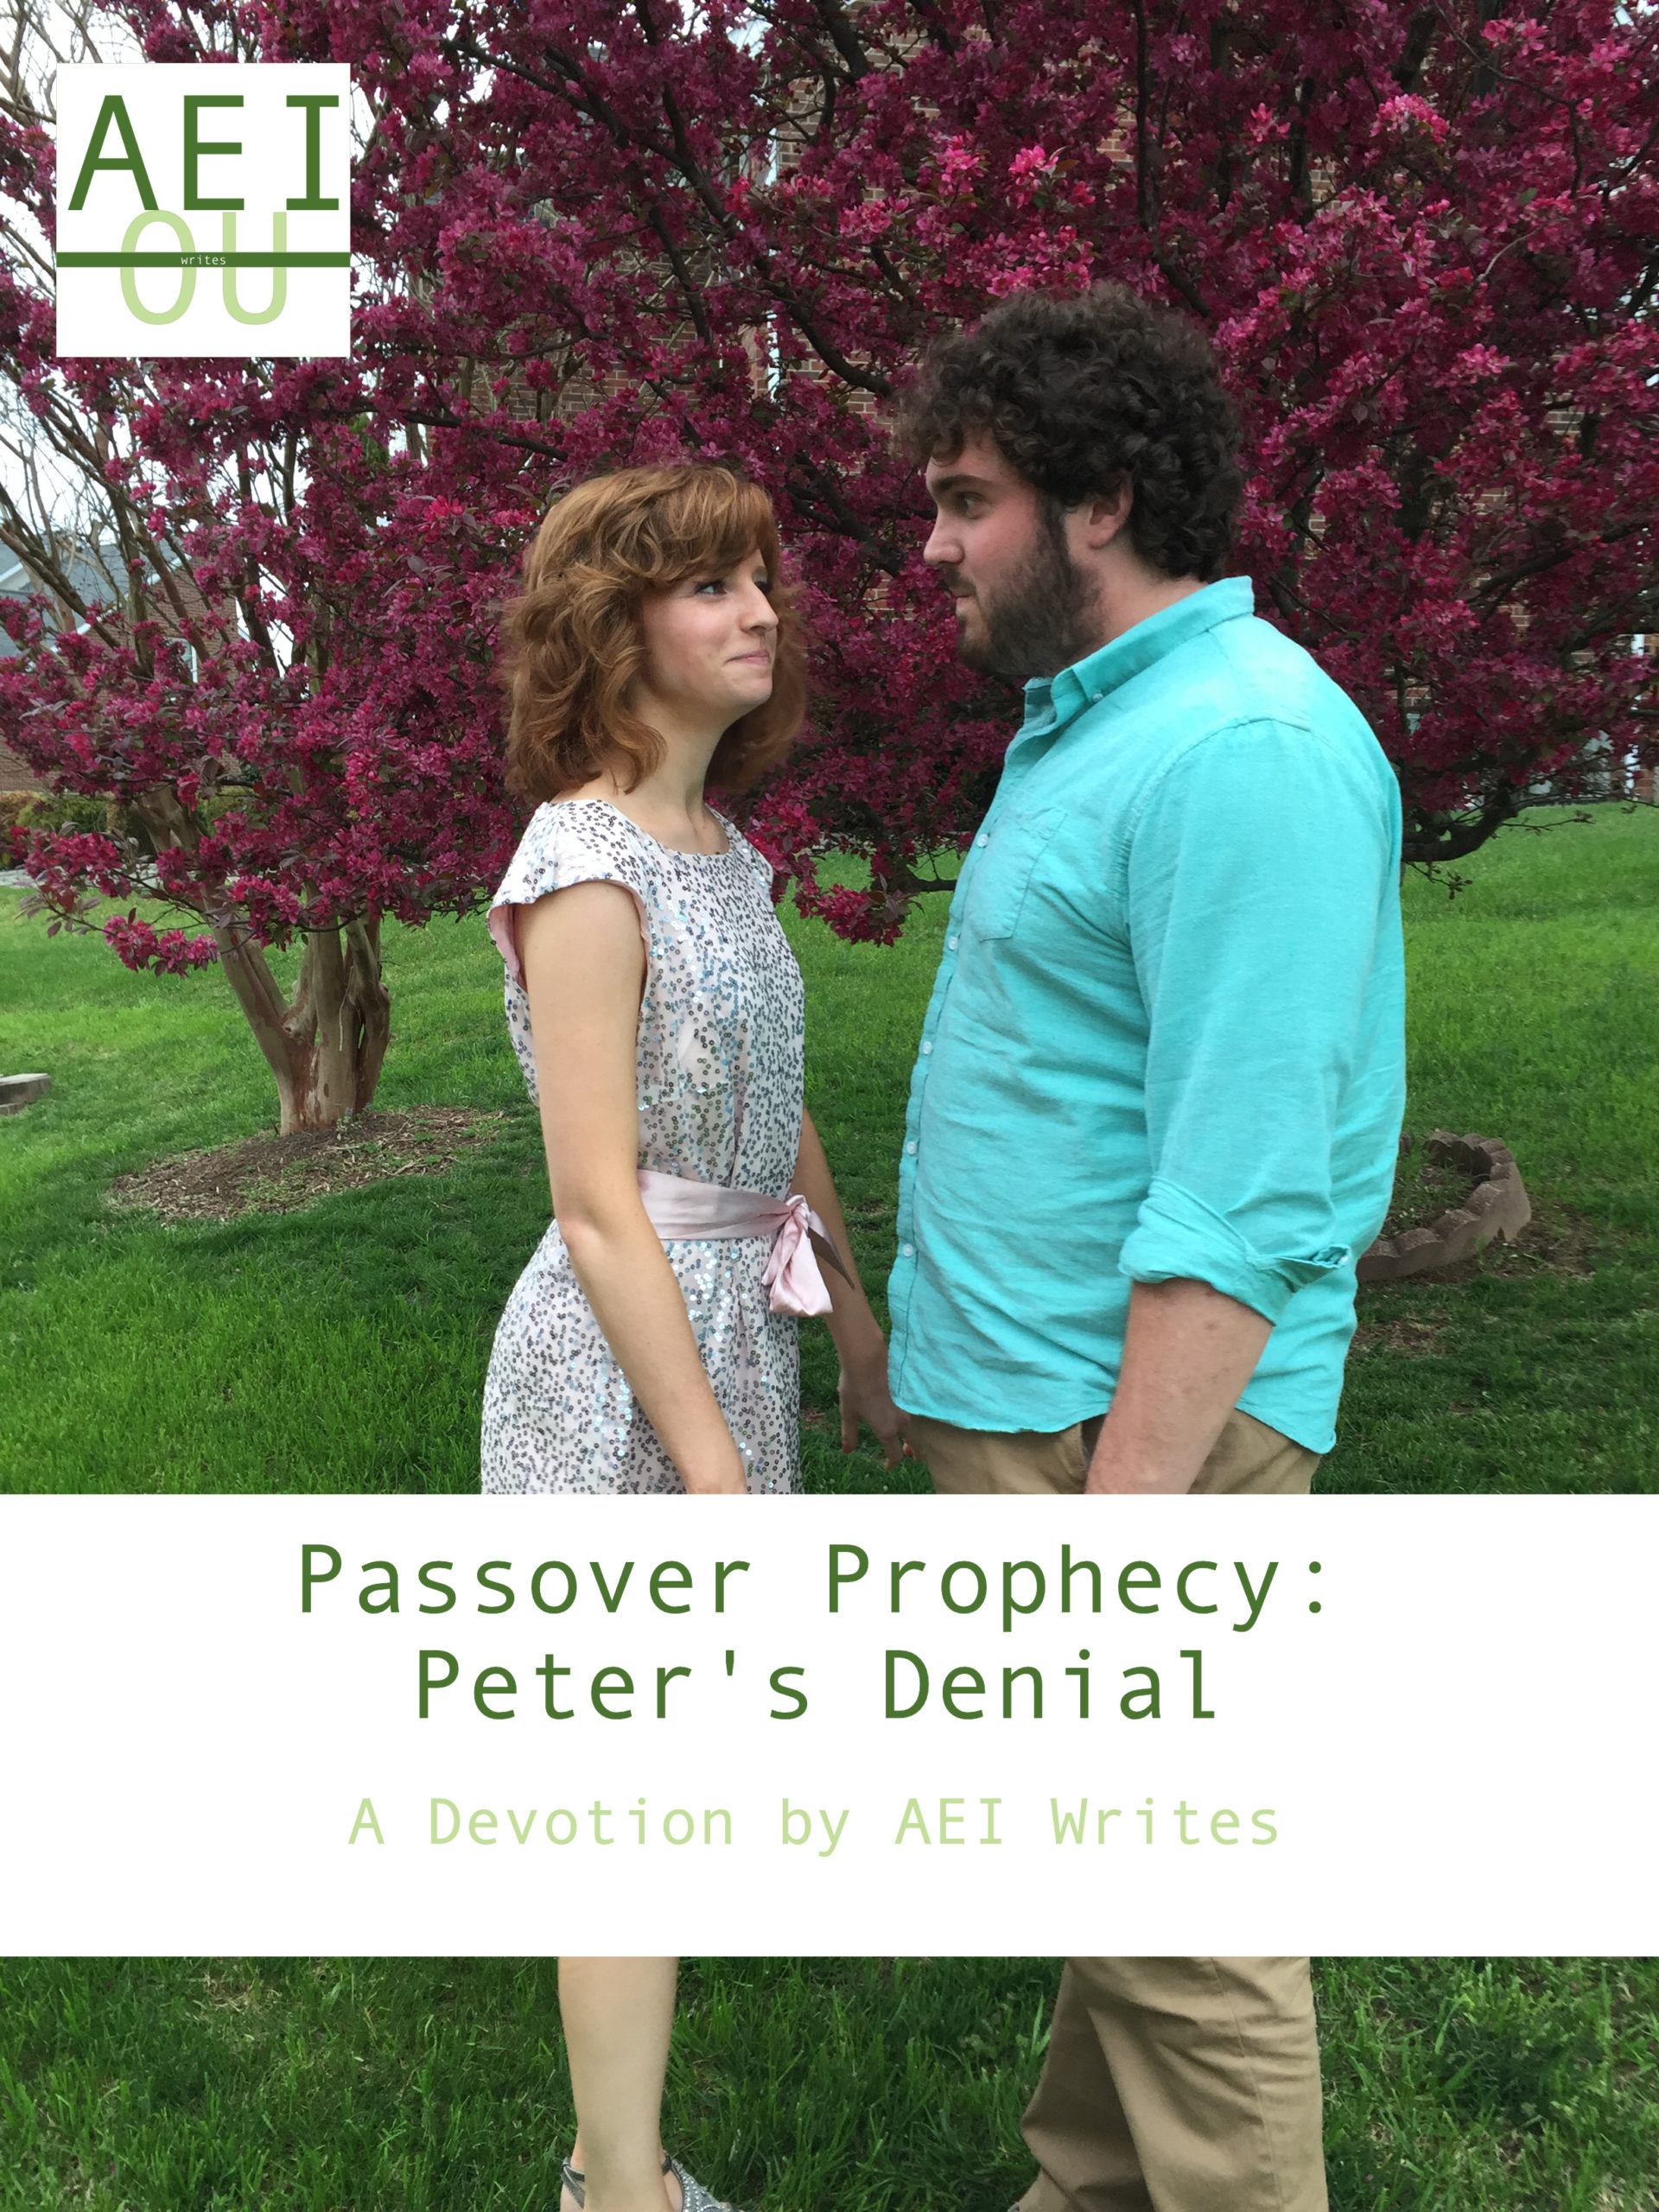 Passover Prophecy: Peter’s Denial